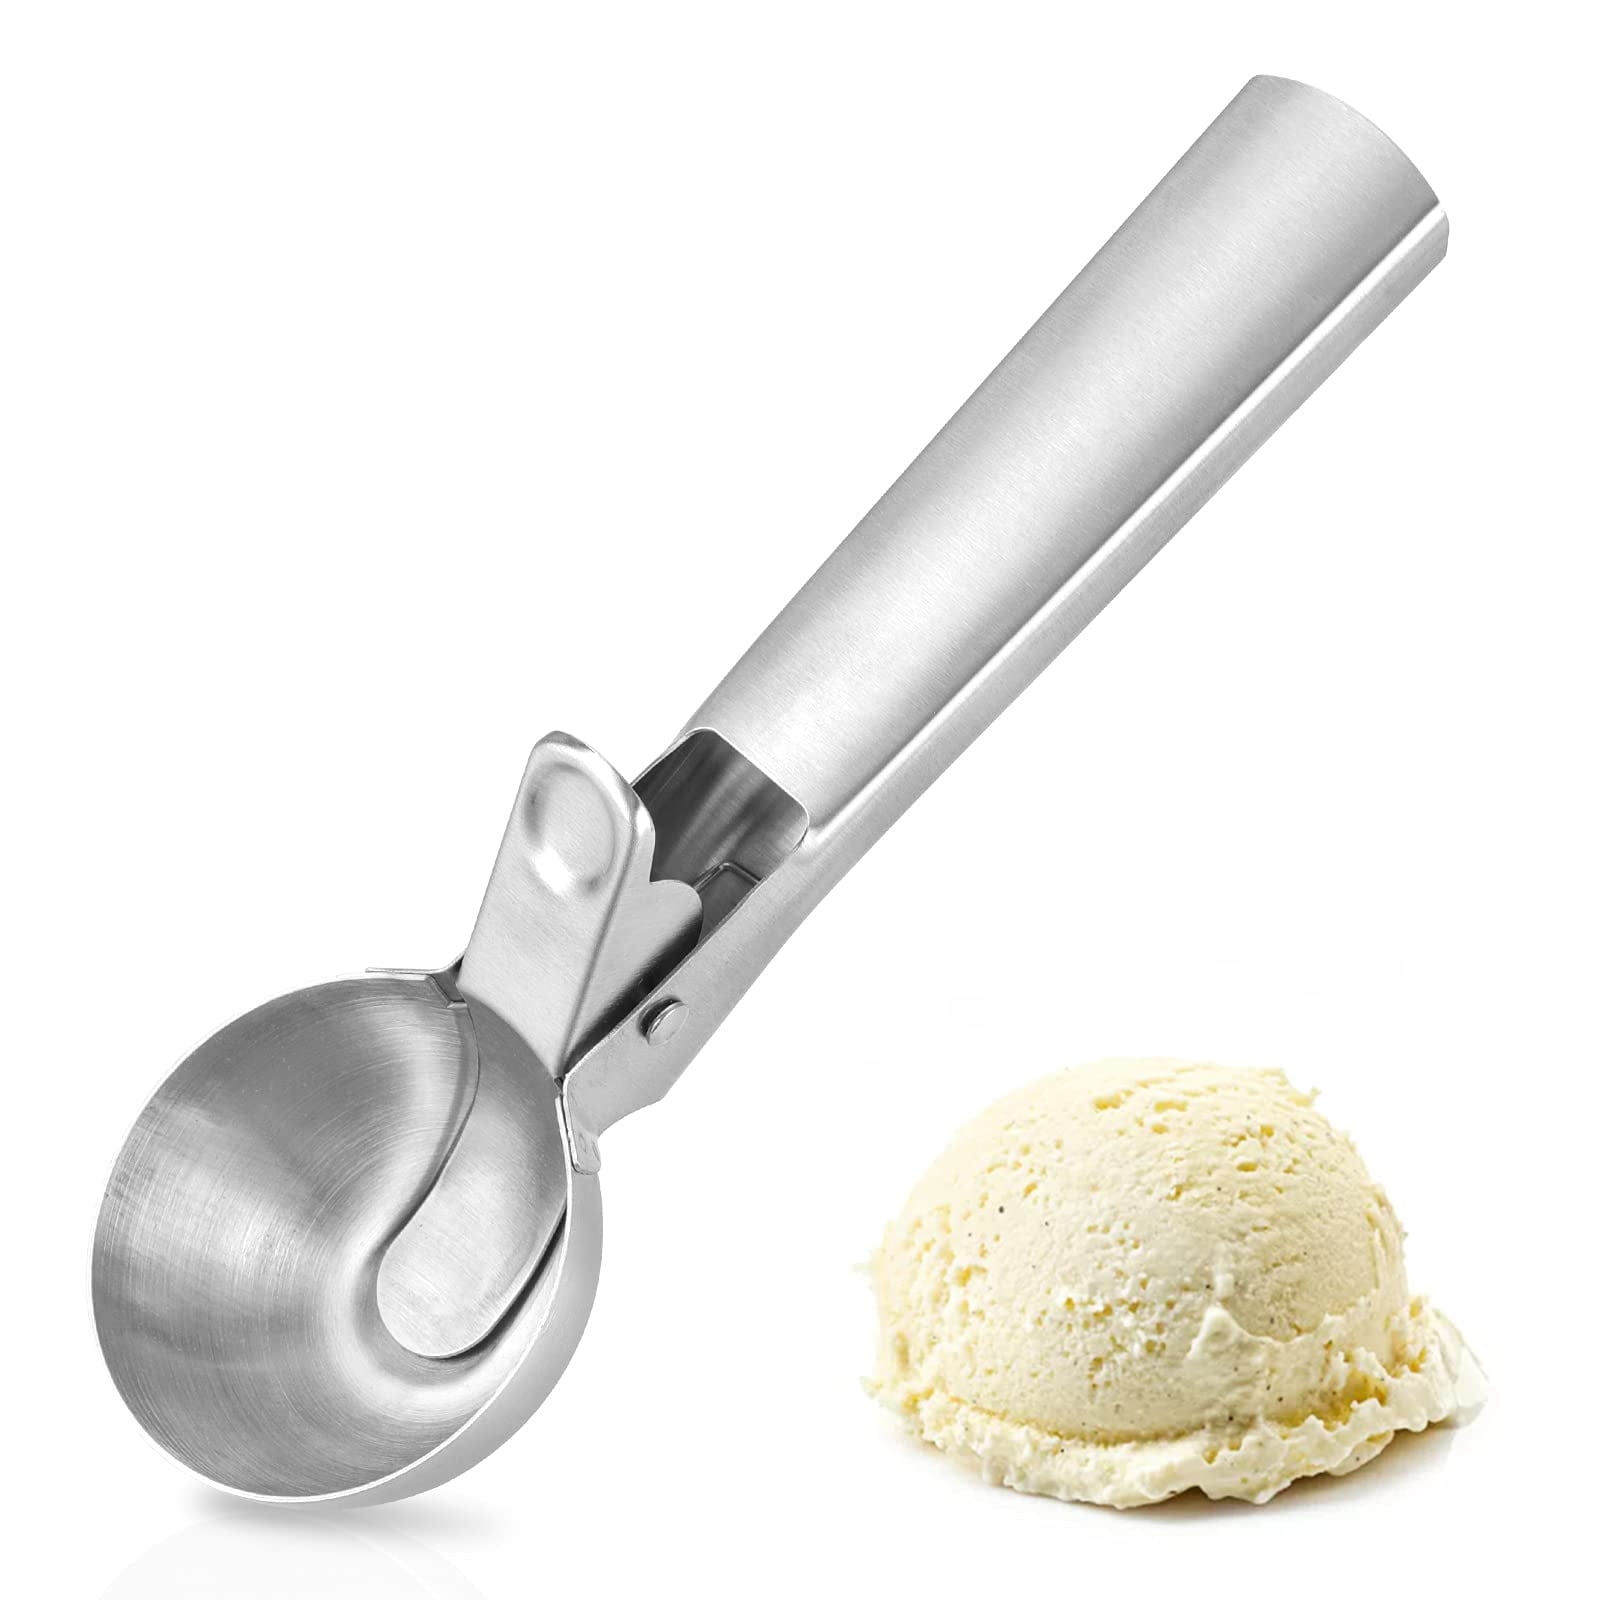 Solid Stainless Steel Ice Cream Scoop, Fruits Scoop, With Trigger,  Stainless Steel,easy To Use,convenient, Fast And Durable.perfect For Frozen  Yogurt